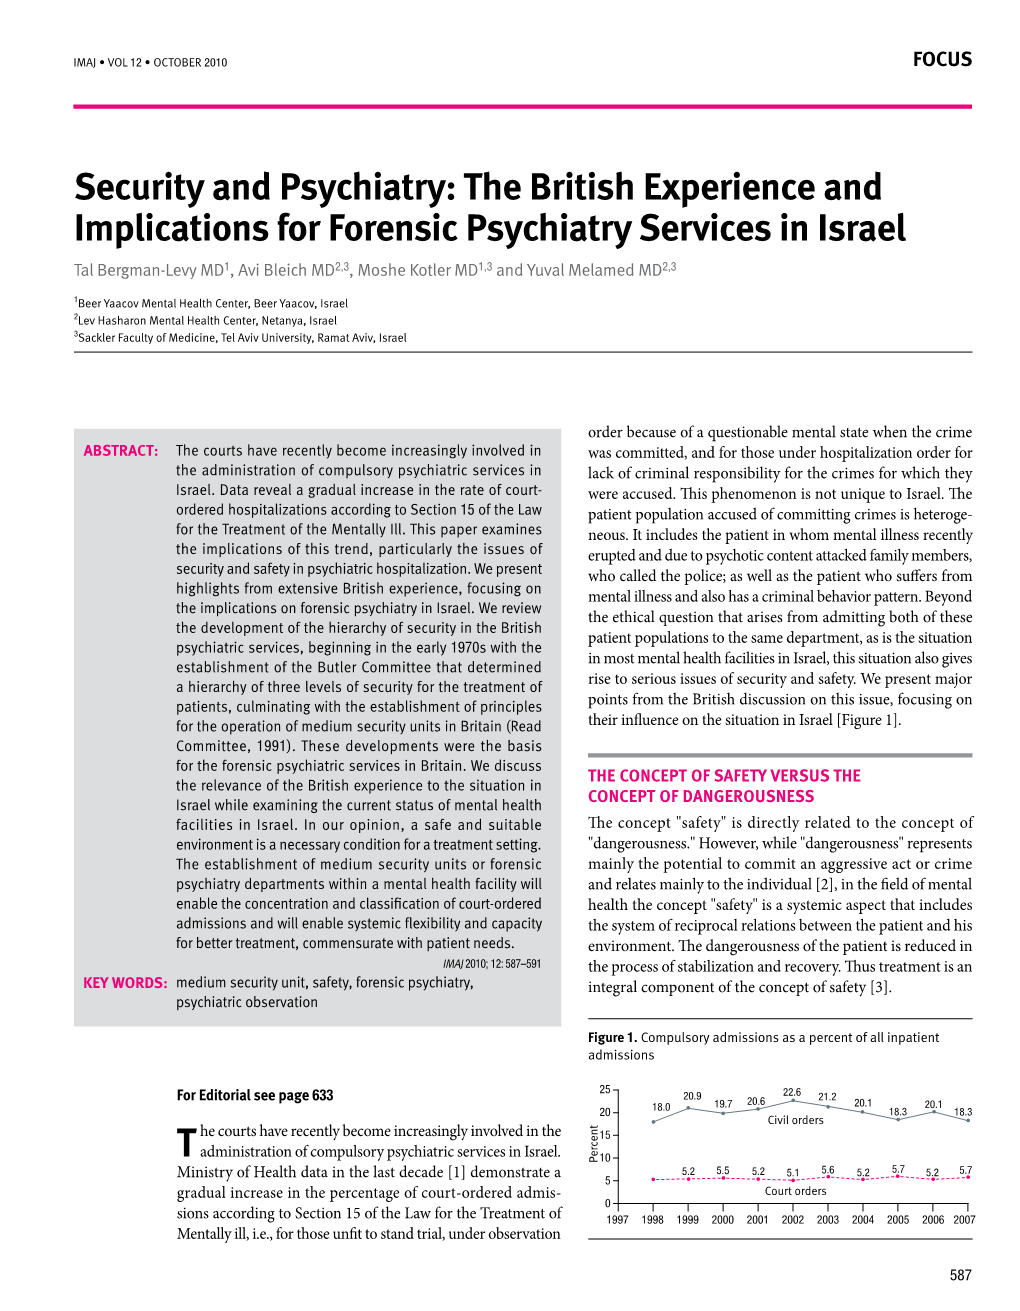 Security and Psychiatry: the British Experience and Implications for Forensic Psychiatry Services in Israel